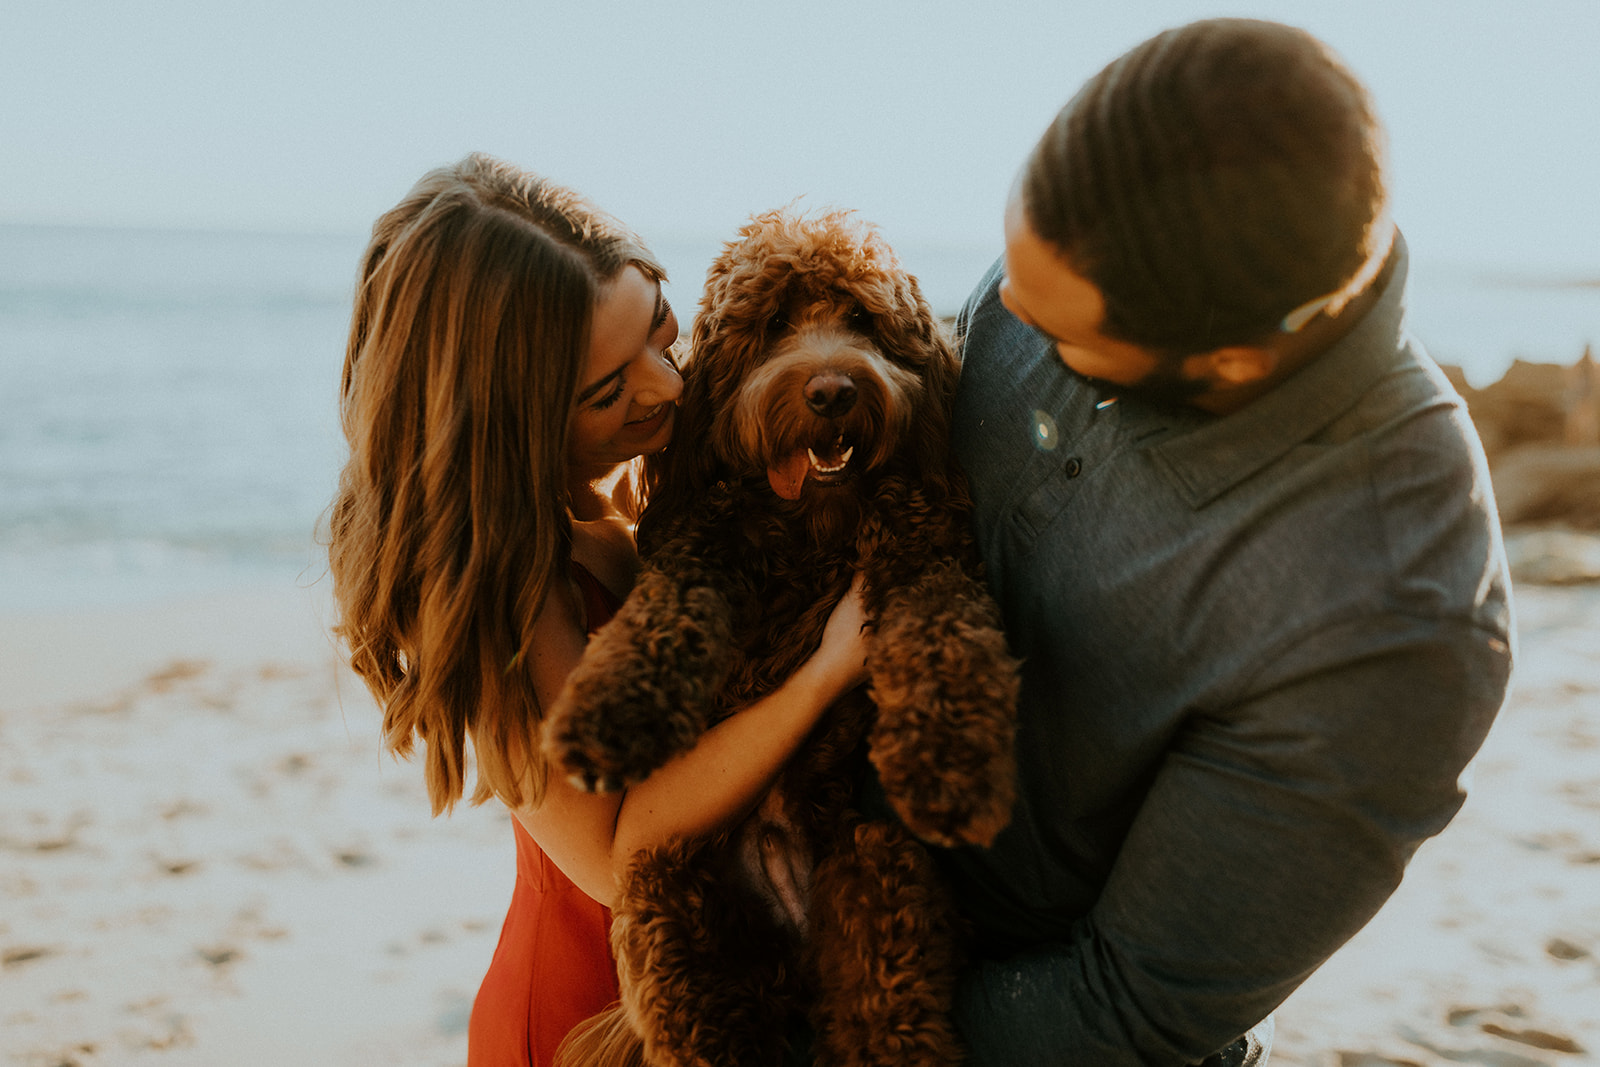 Destination Engagement Photos: Couple posing with their adorable dog at the beach, taken by McKenna Christine Photography